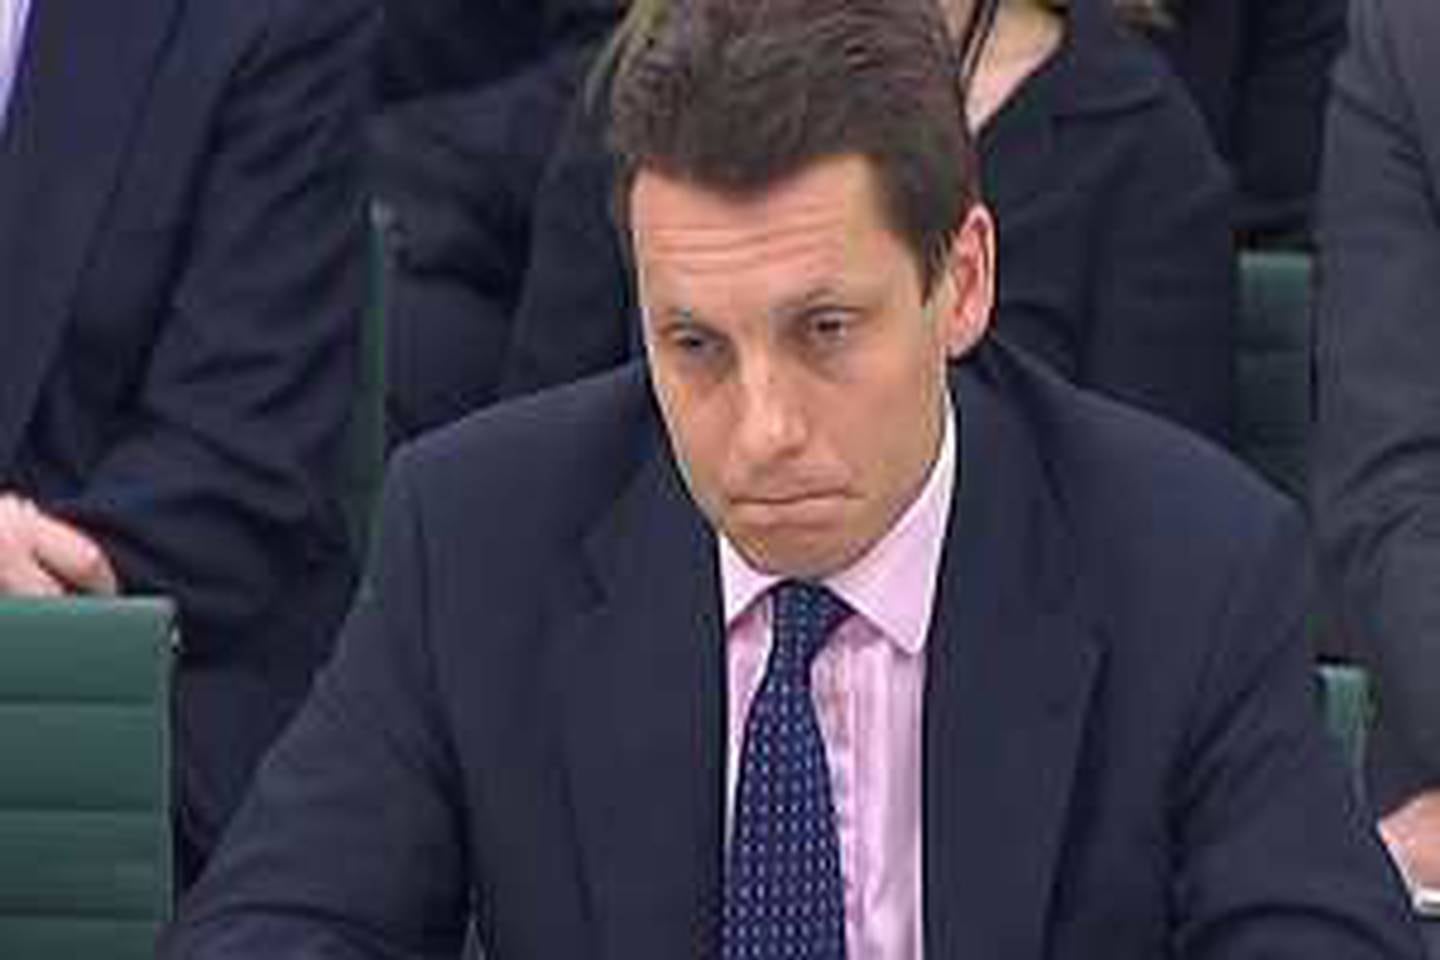 A video grab image shows Andy Hornby, the former chief executive of HBOS appearing at the Treasury Select Committee in London on February 10, 2009.  Four bankers blamed for taking Royal Bank of Scotland and HBOS to the brink of collapse were quizzed over their errors that have caused a backlash against the sector and its lavish pay. REUTERS/Parbul TV via Reuters TV    (BRITAIN)  FOR EDITORIAL USE ONLY. NOT FOR SALE FOR MARKETING OR ADVERTISING CAMPAIGNS *** Local Caption ***  LON705_BRITAIN-BANK_0210_03.JPG